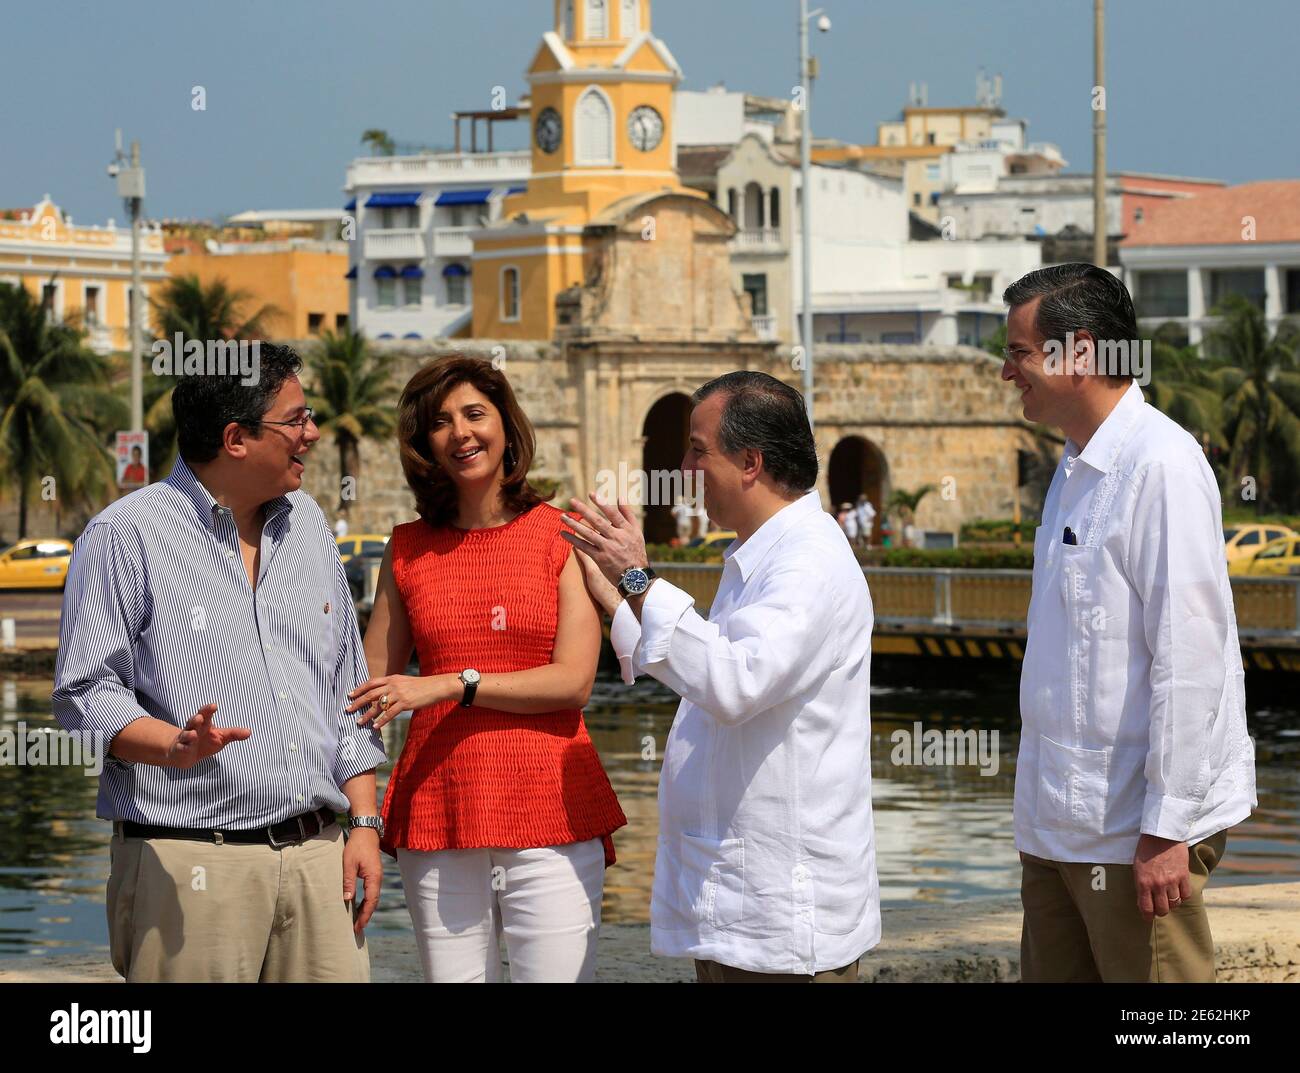 Maria Jose Rojas High Resolution Stock Photography And Images Alamy